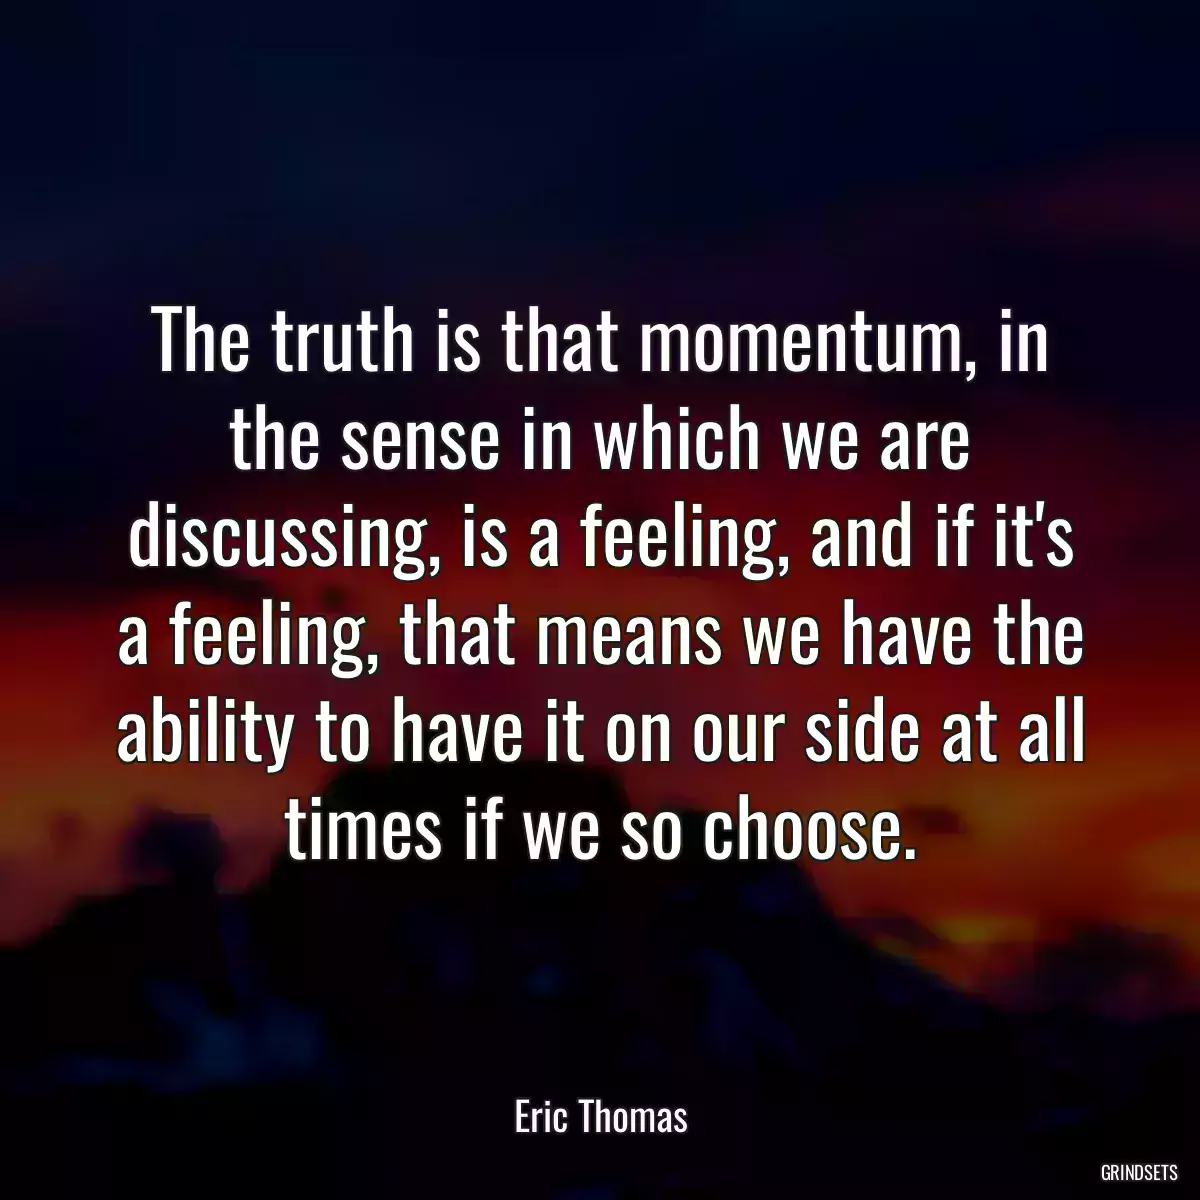 The truth is that momentum, in the sense in which we are discussing, is a feeling, and if it\'s a feeling, that means we have the ability to have it on our side at all times if we so choose.